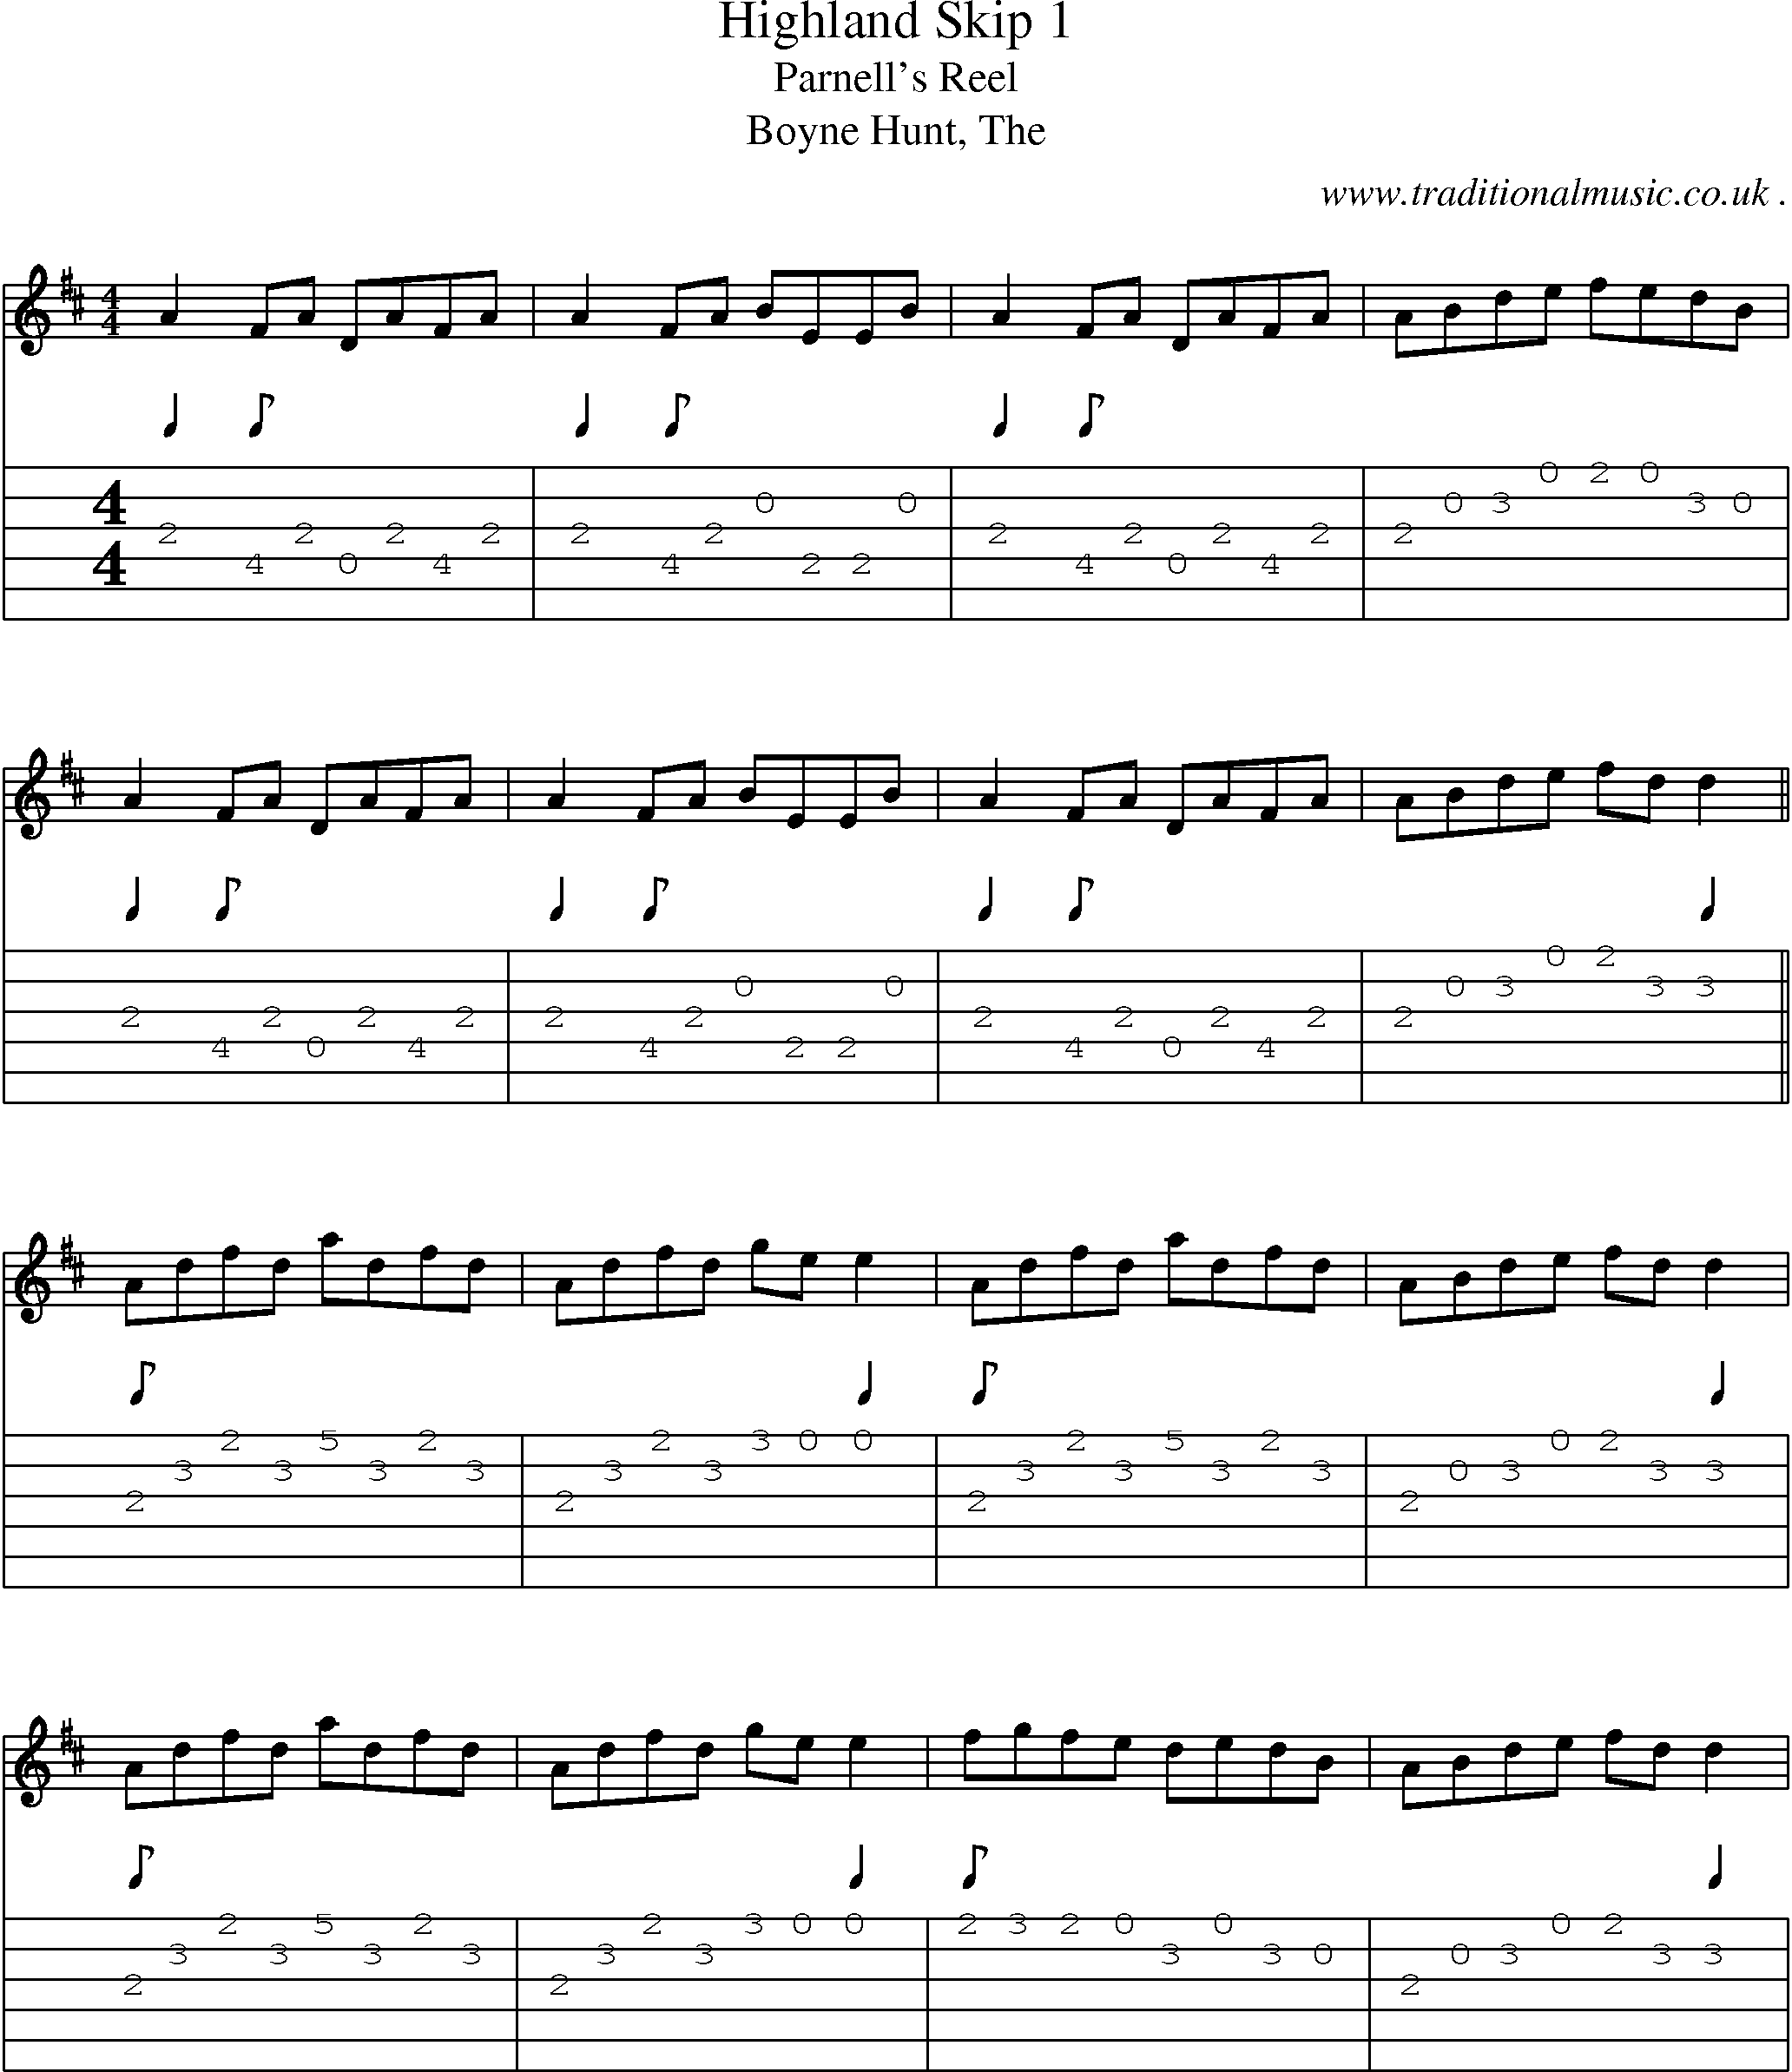 Sheet-music  score, Chords and Guitar Tabs for Highland Skip 1